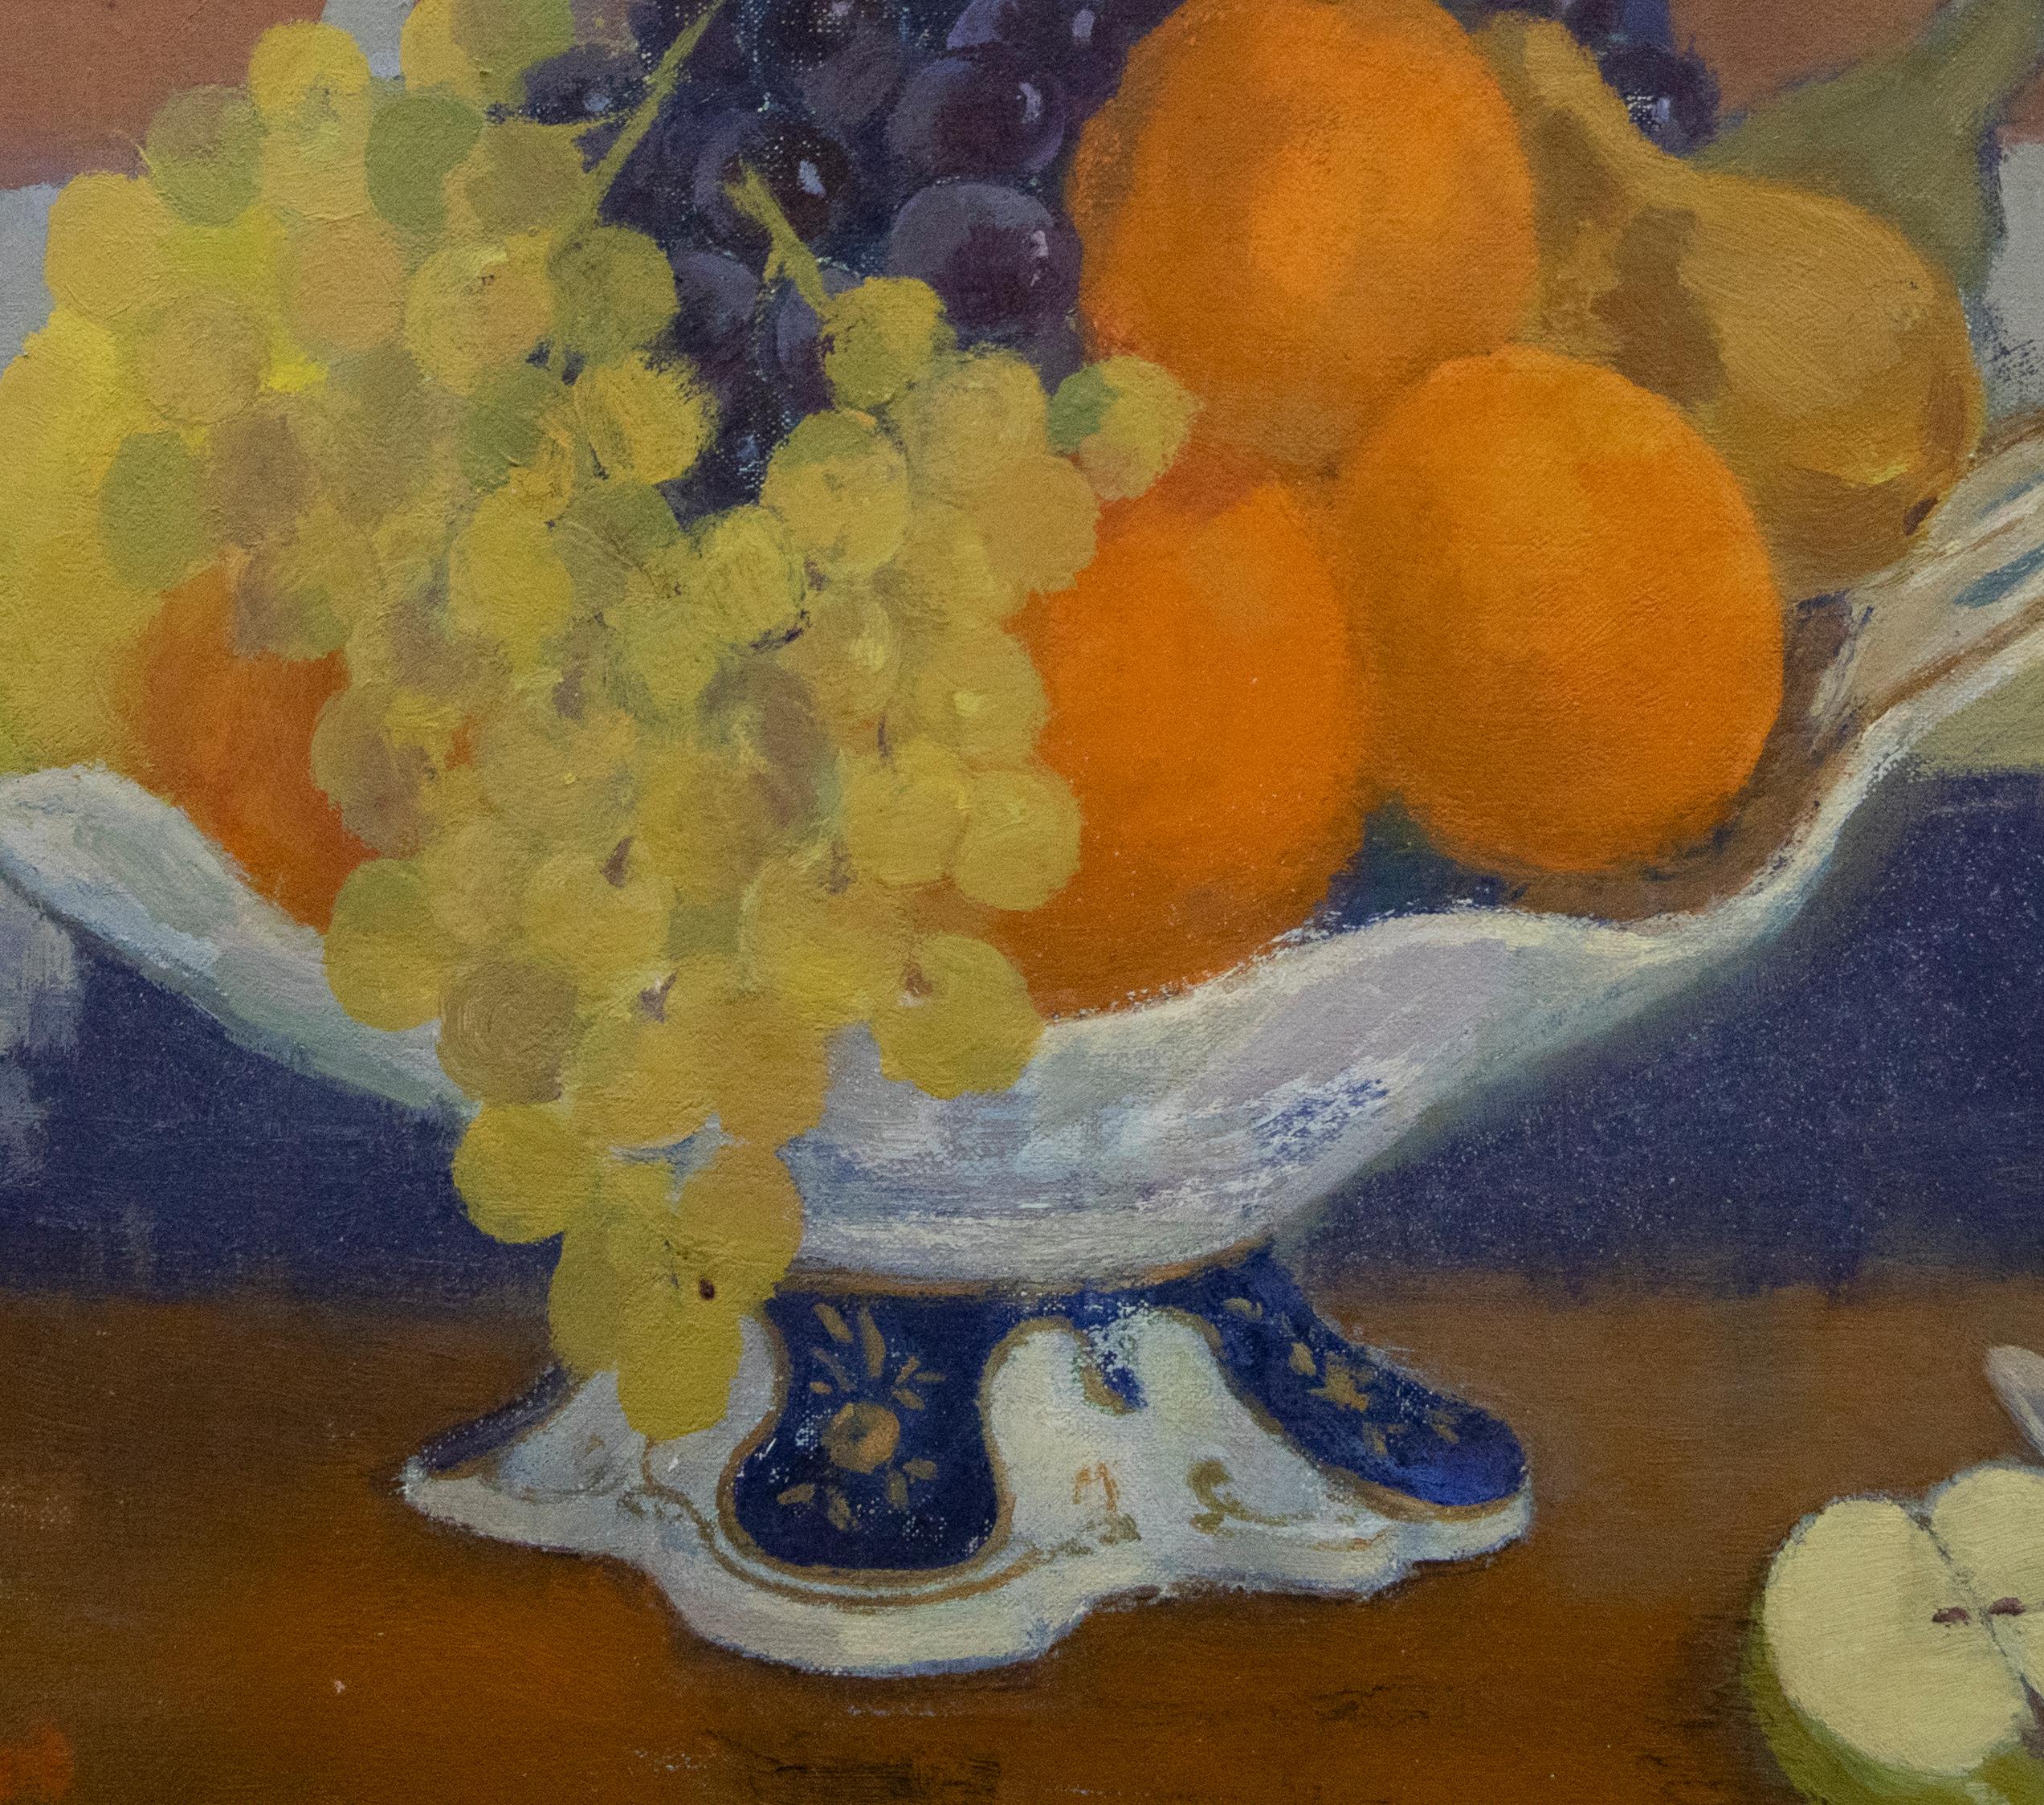 A colourful modern still life study of a porcelain fruit bowl full to the brim with oranges, pears, apples and grapes. In the foreground a cut apple and knife sit to the right of the pedestalled bowl, bringing scale and perspective to the window